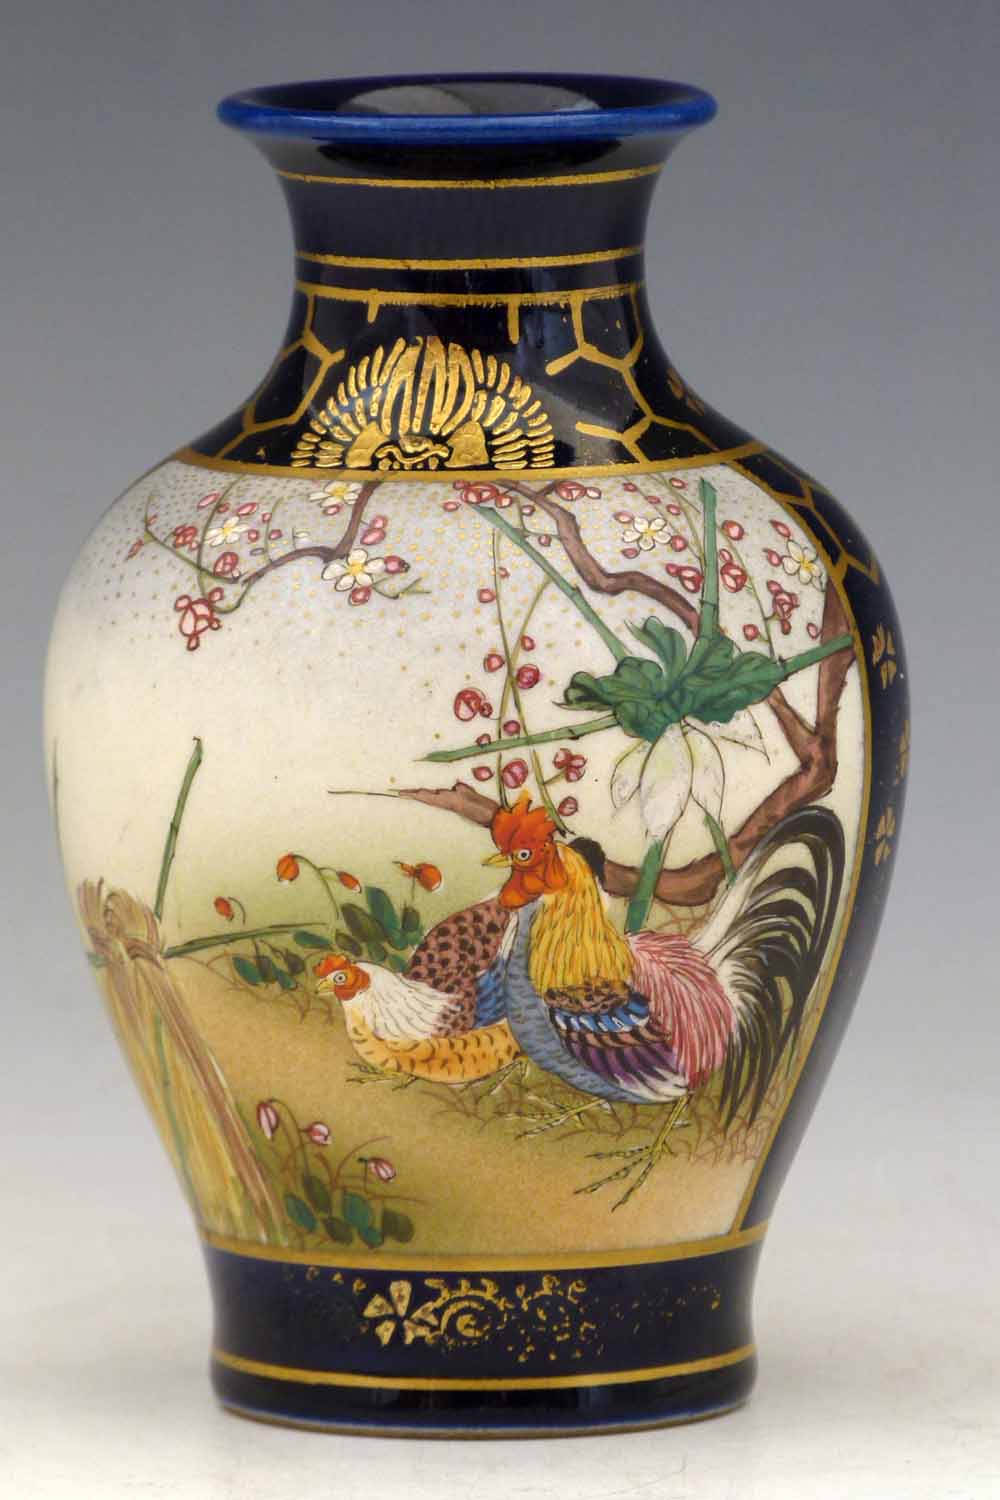 Small Japanese Satsuma vase painted with panels of a cockerel and other birds, remains of seal mark,